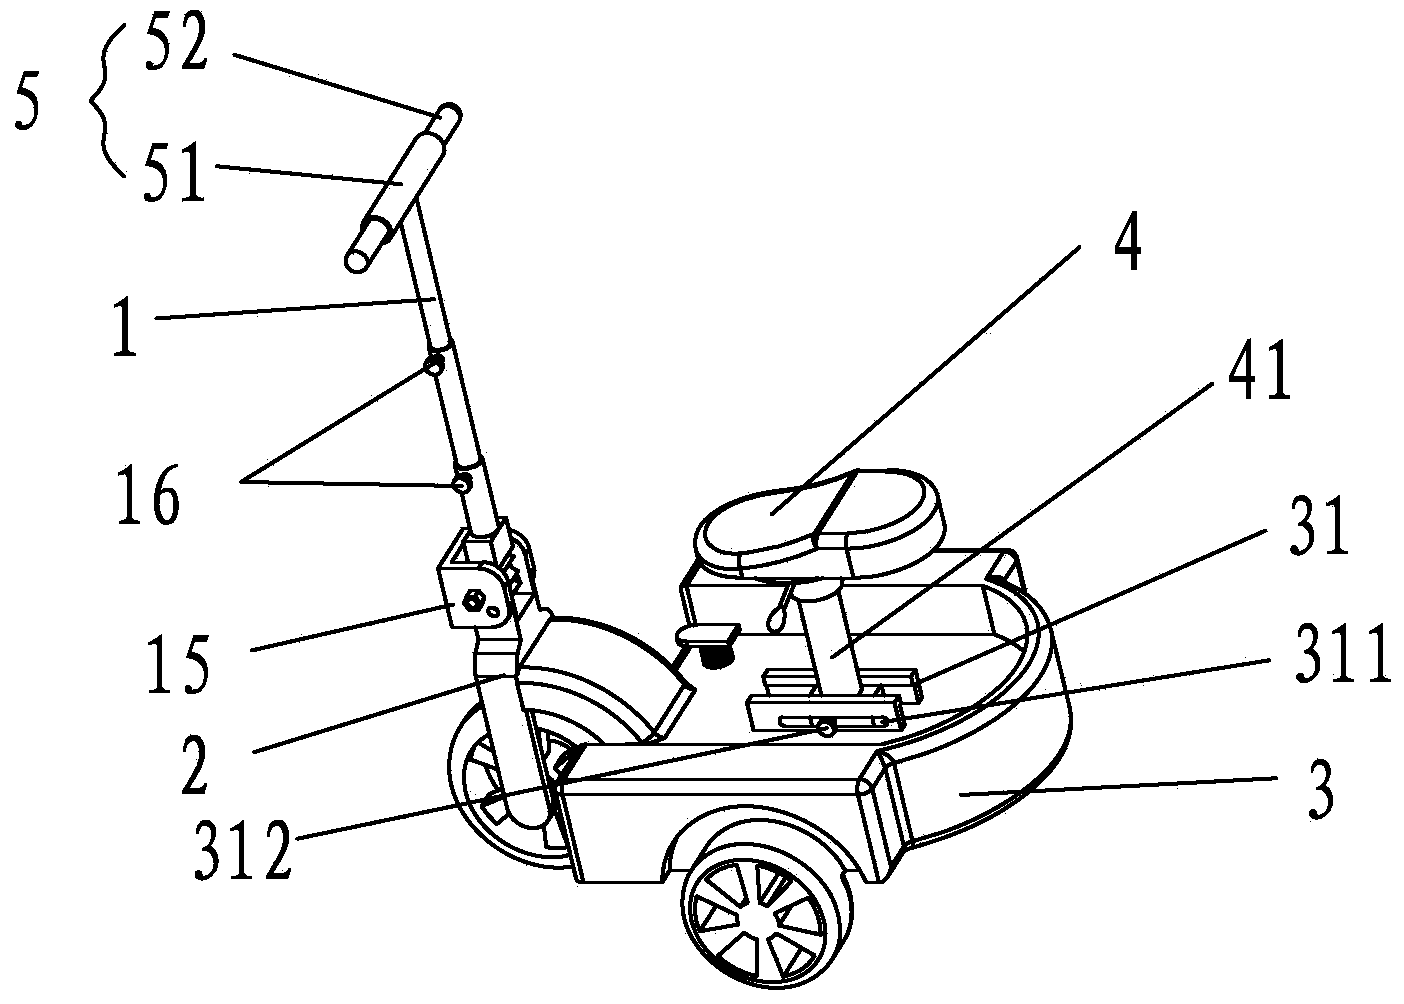 Three-wheel electric vehicle convenient to store